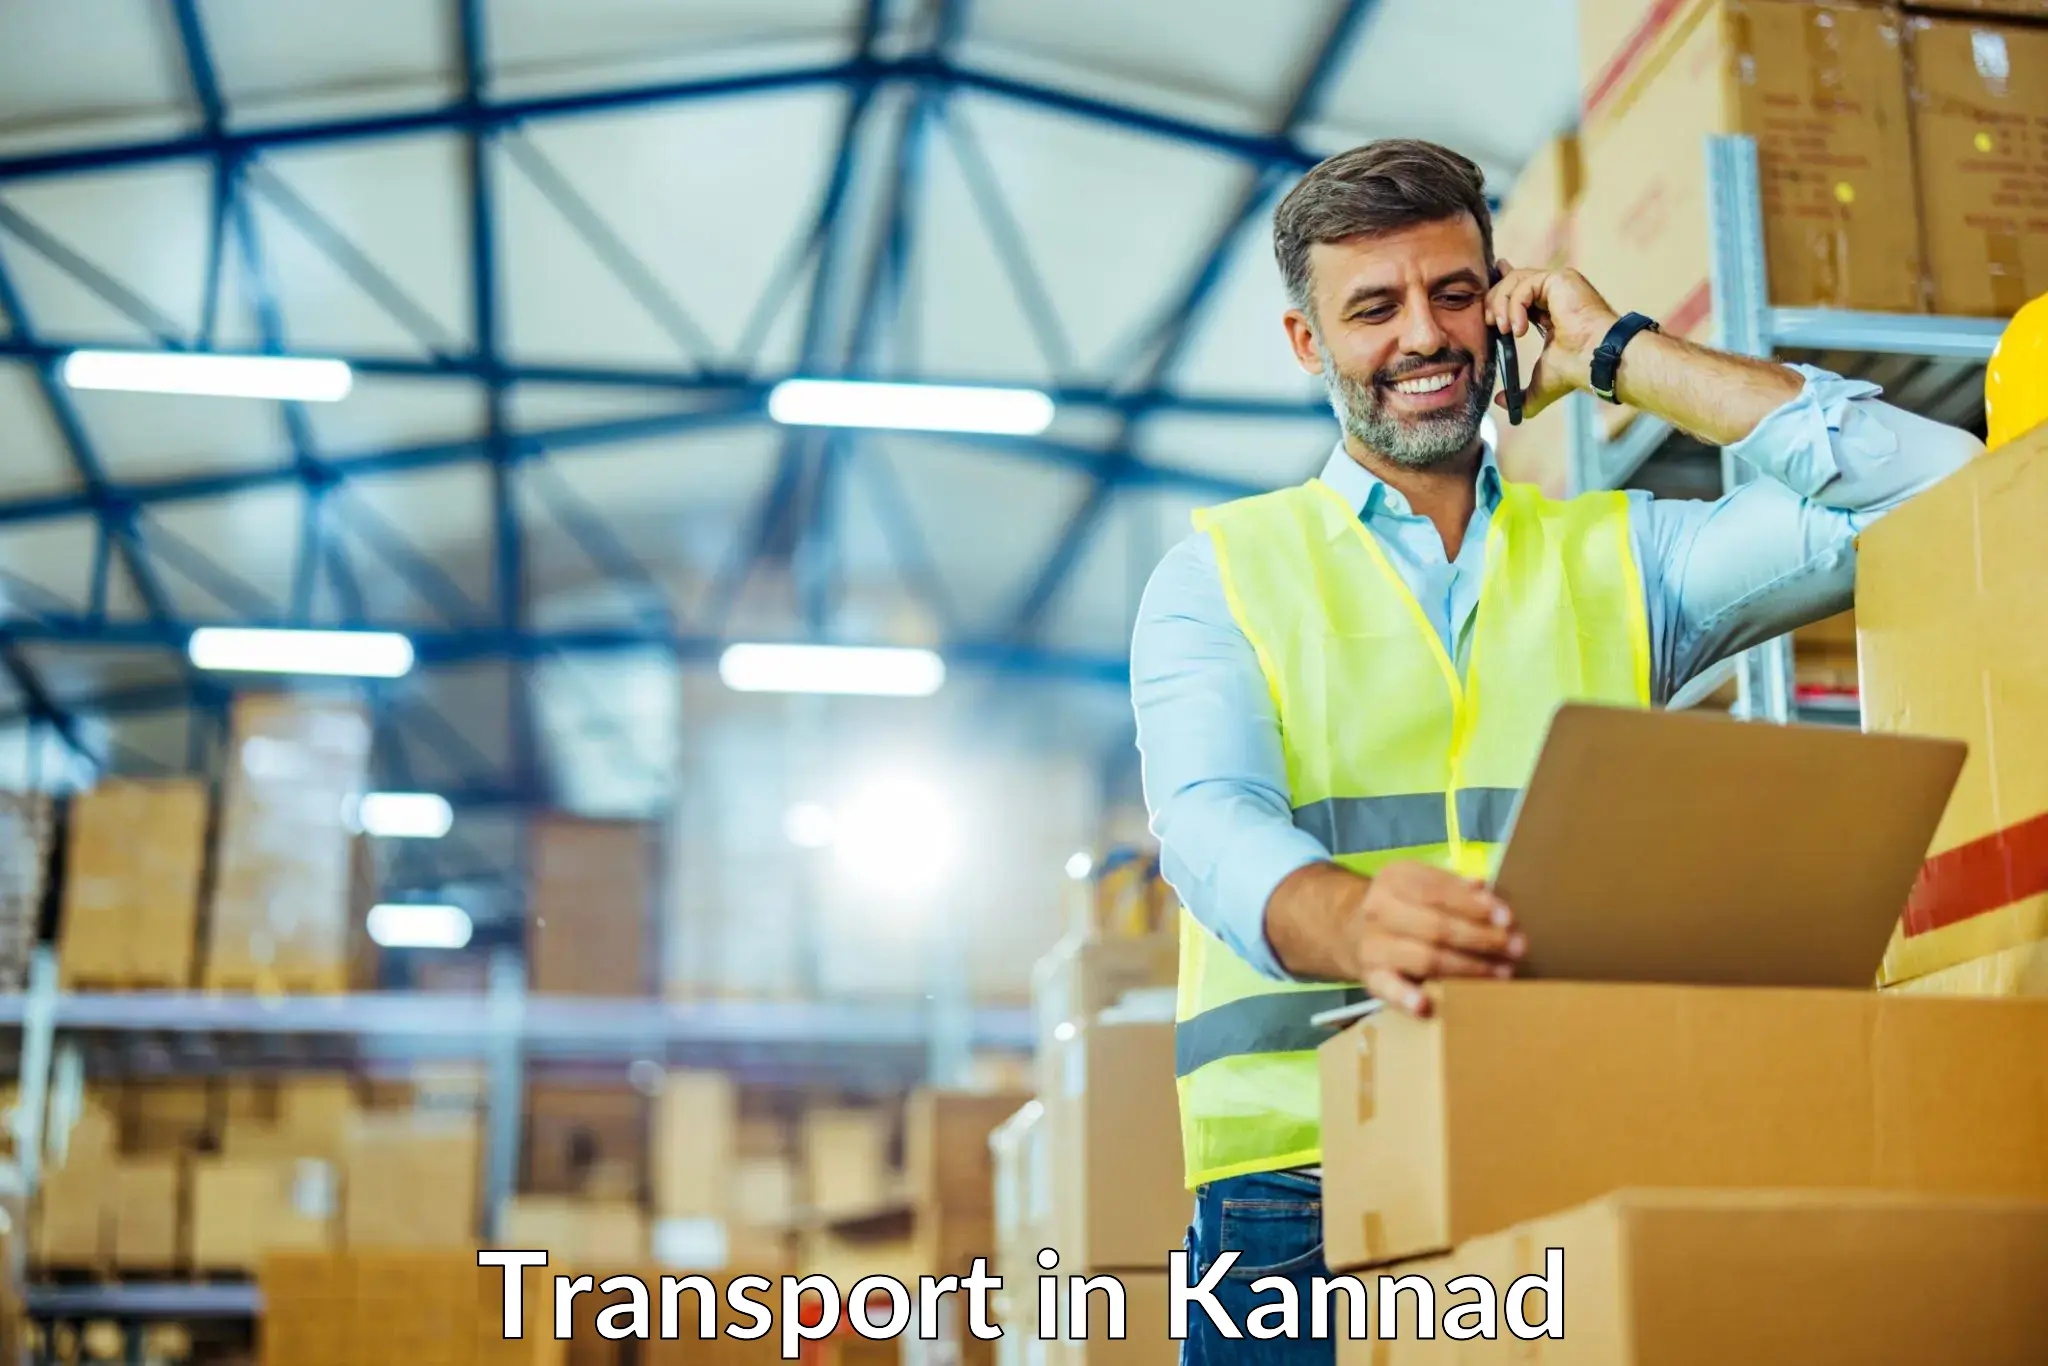 Truck transport companies in India in Kannad